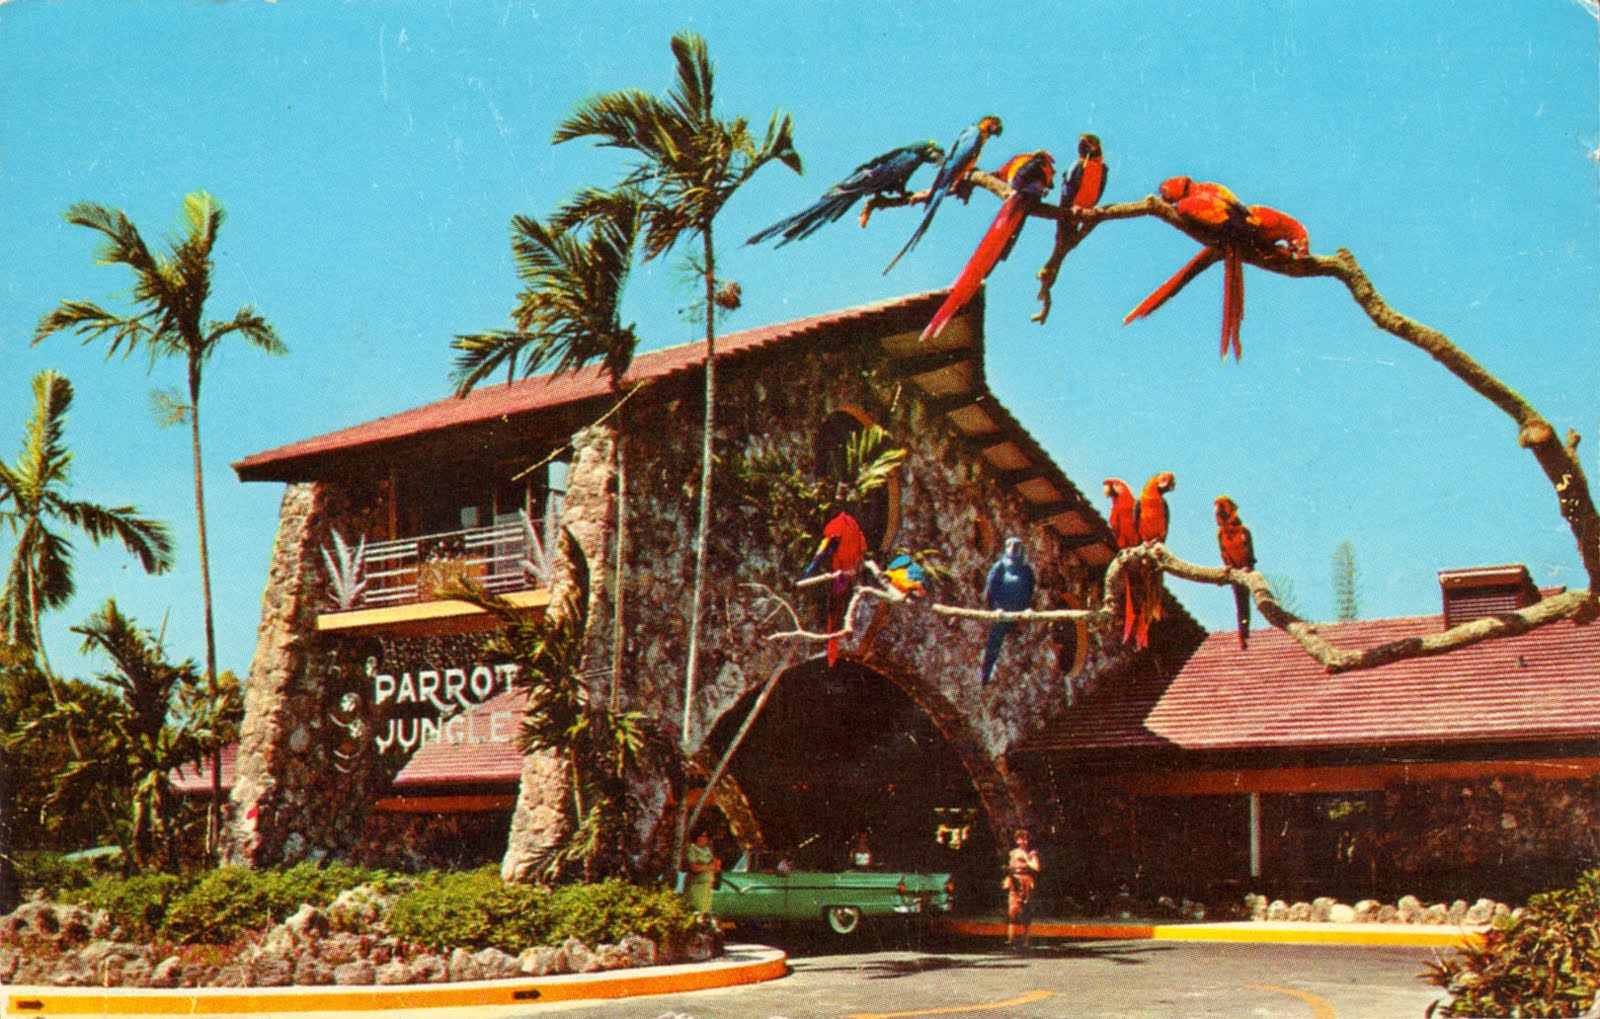 Download this Unusual Entrance The Parrot Jungle Miami Florida This Exotic picture